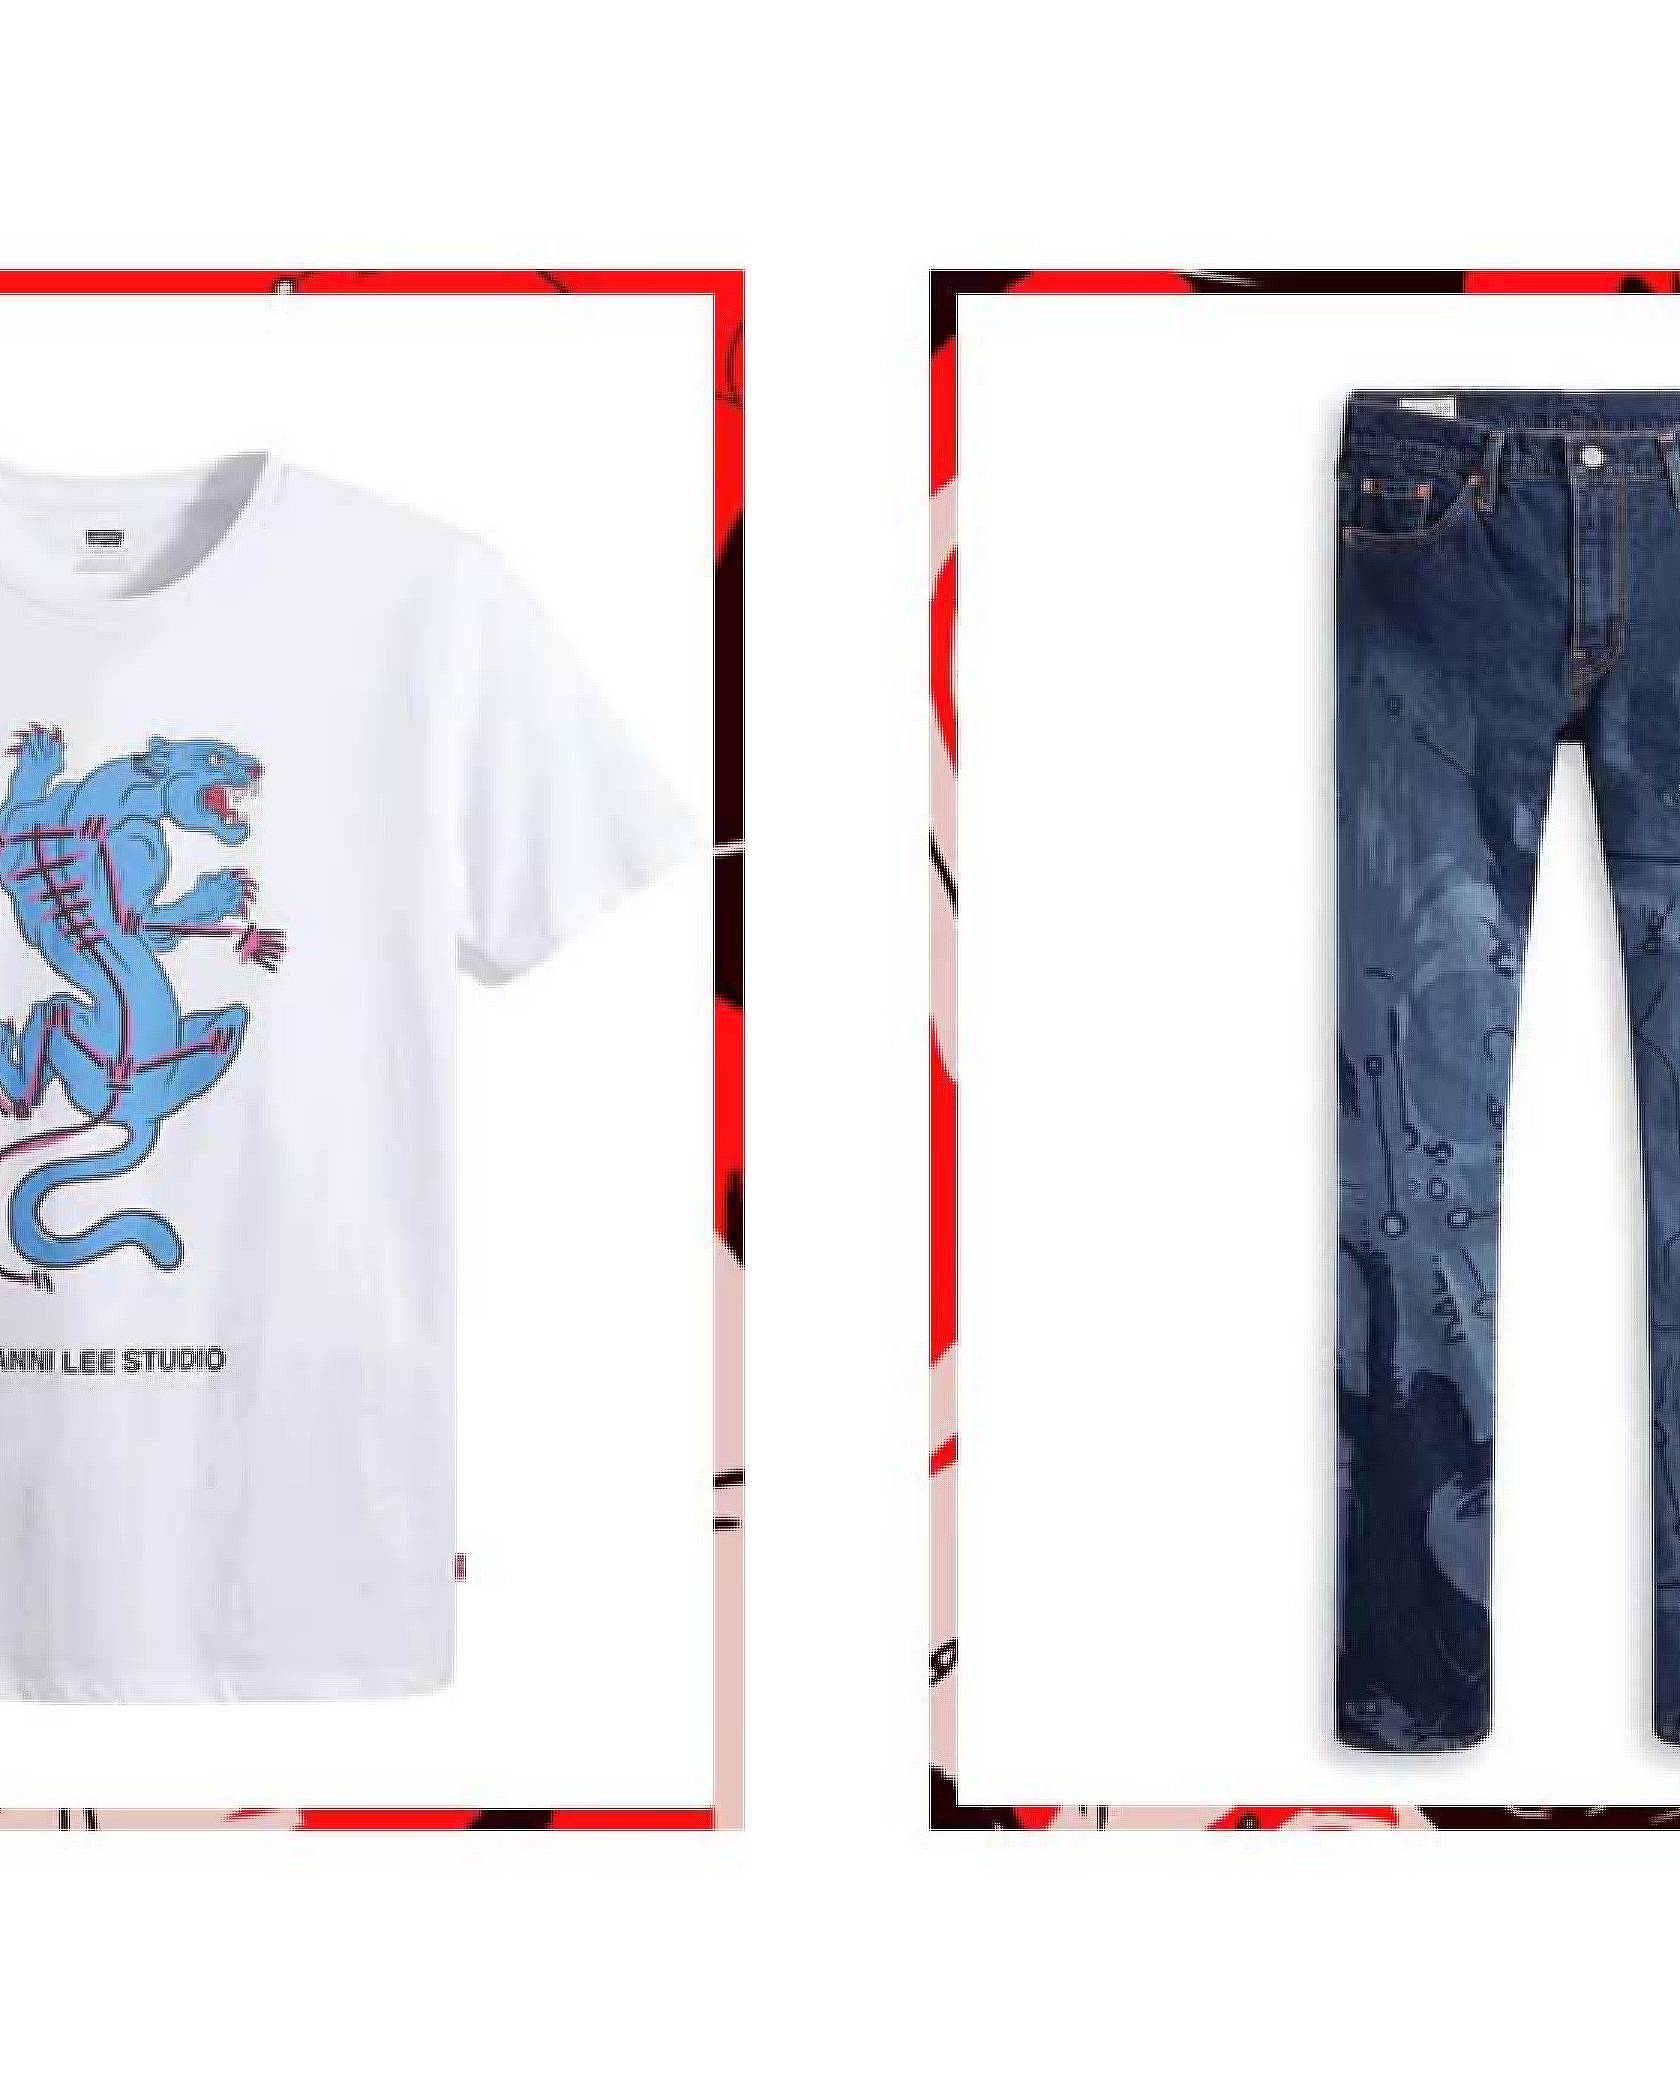 white tee shirt and jeans with artwork